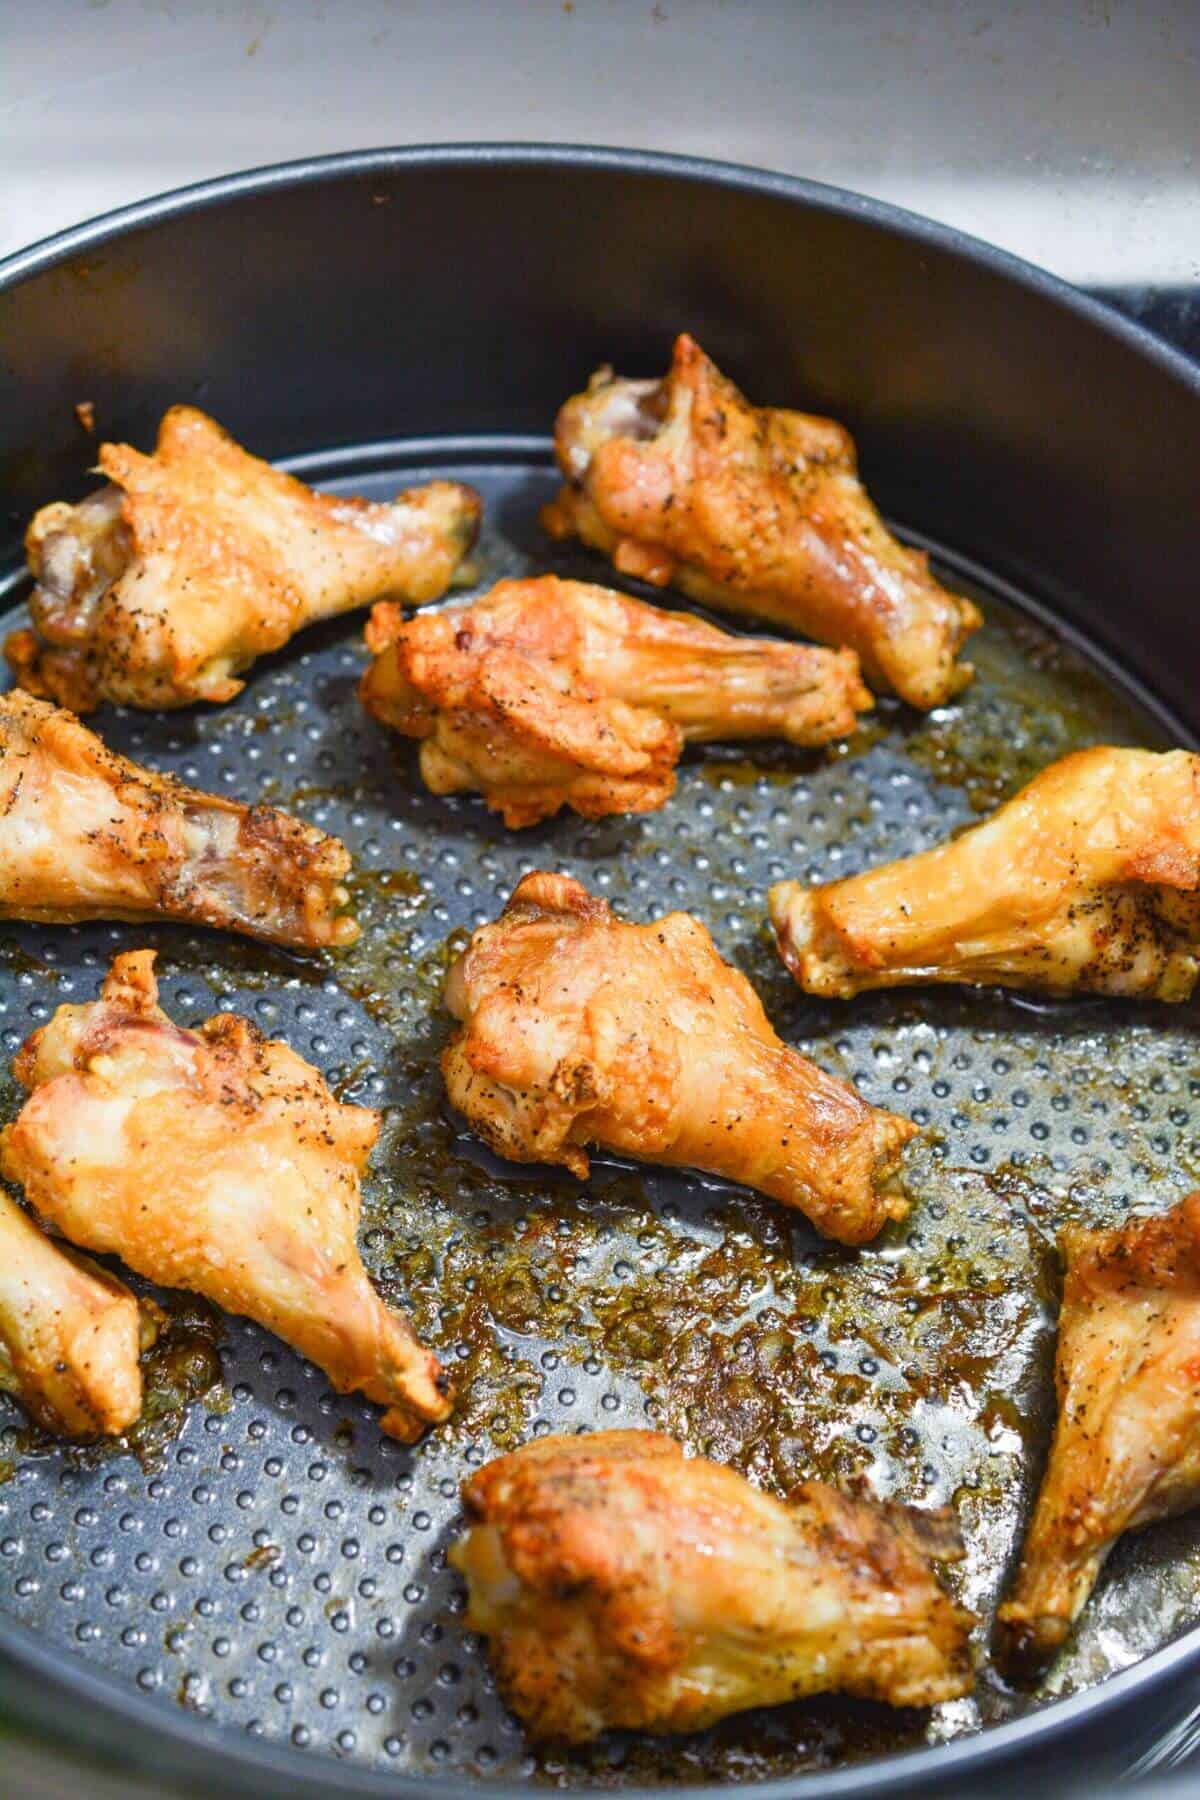 Cooked wings in round baking pan.